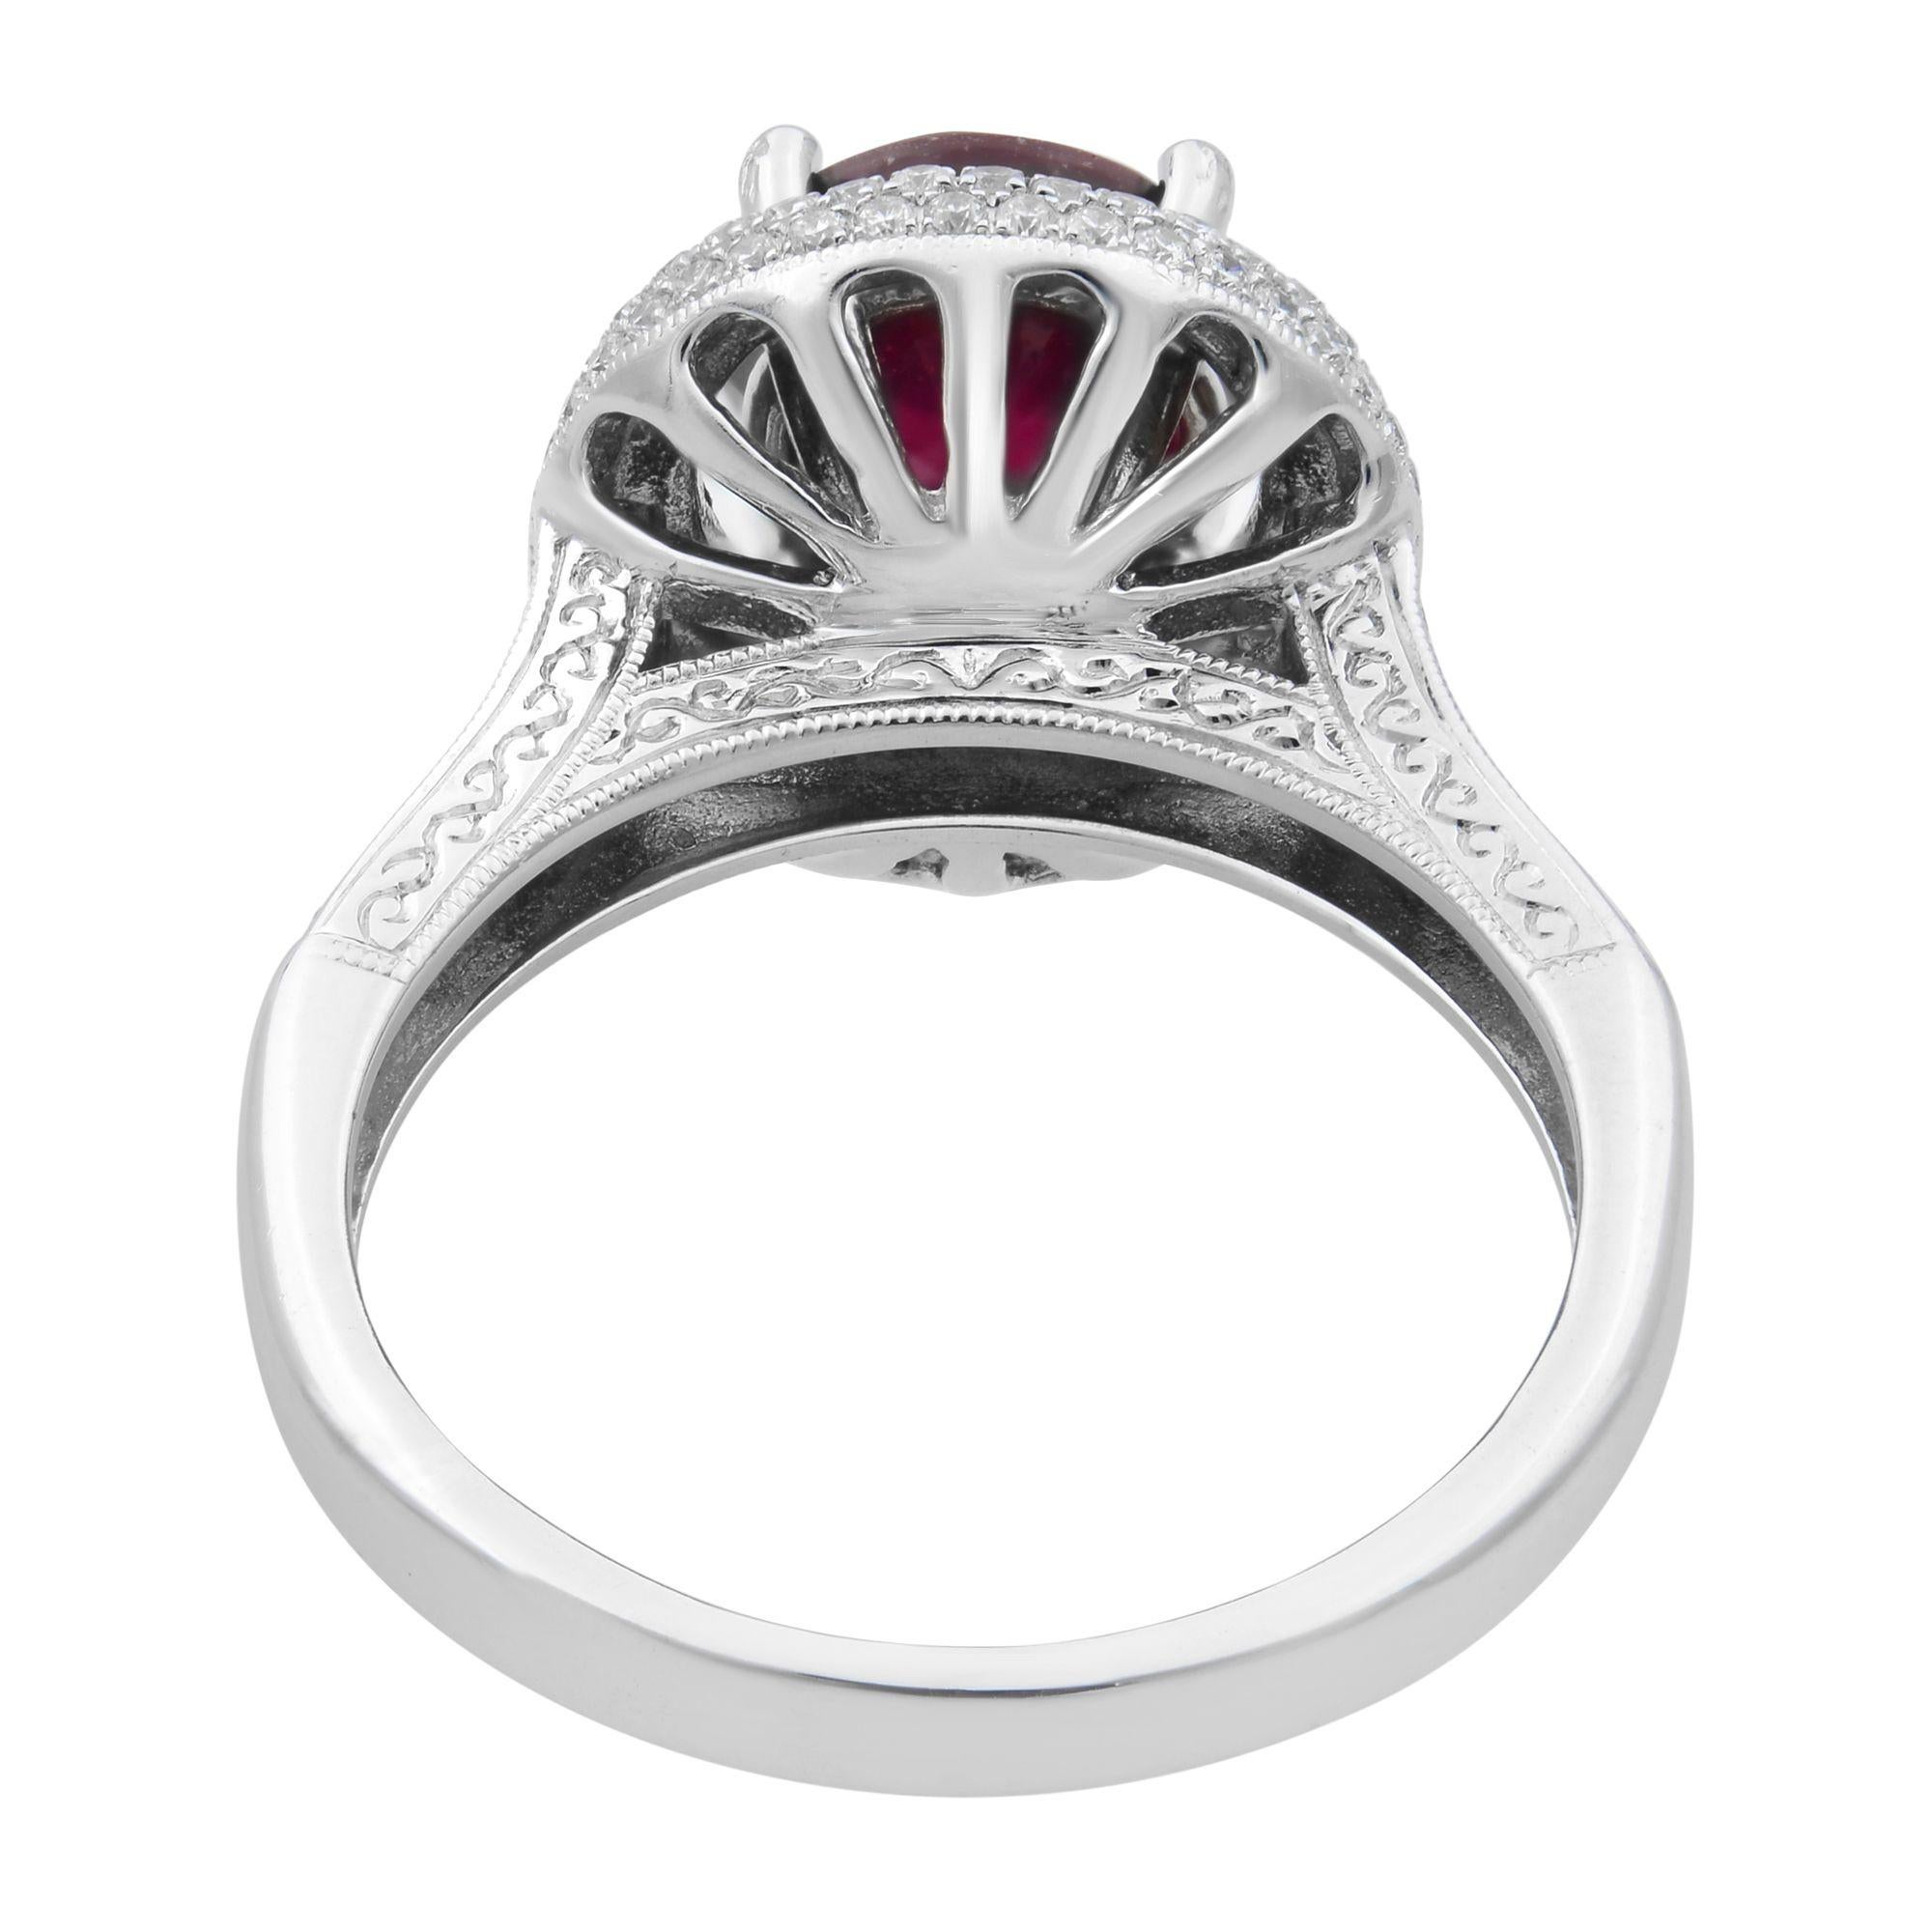 Rachel Koen Ruby and Diamonds Engagement Ring 14K White Gold In New Condition For Sale In New York, NY